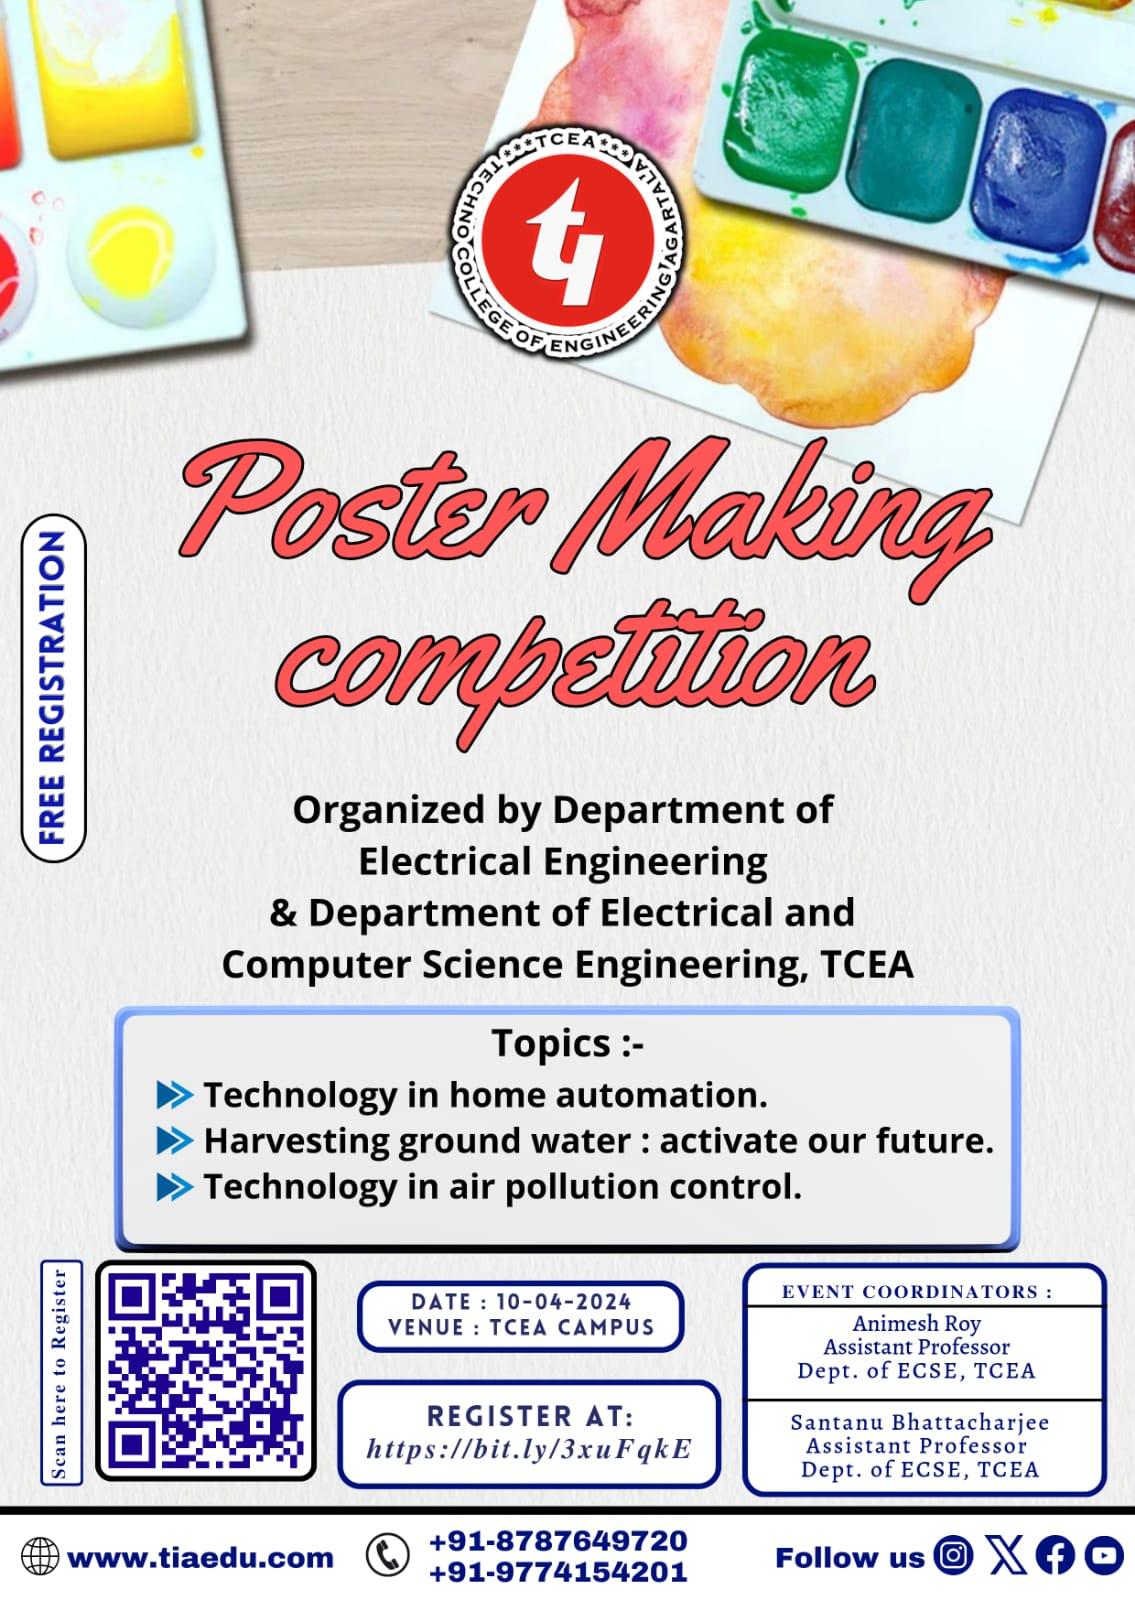 “POSTER MAKING COMPETITION” organized by Department of Electrical Engineering and Department of Electrical & Computer Engineering at TCEA on 10/04/2024